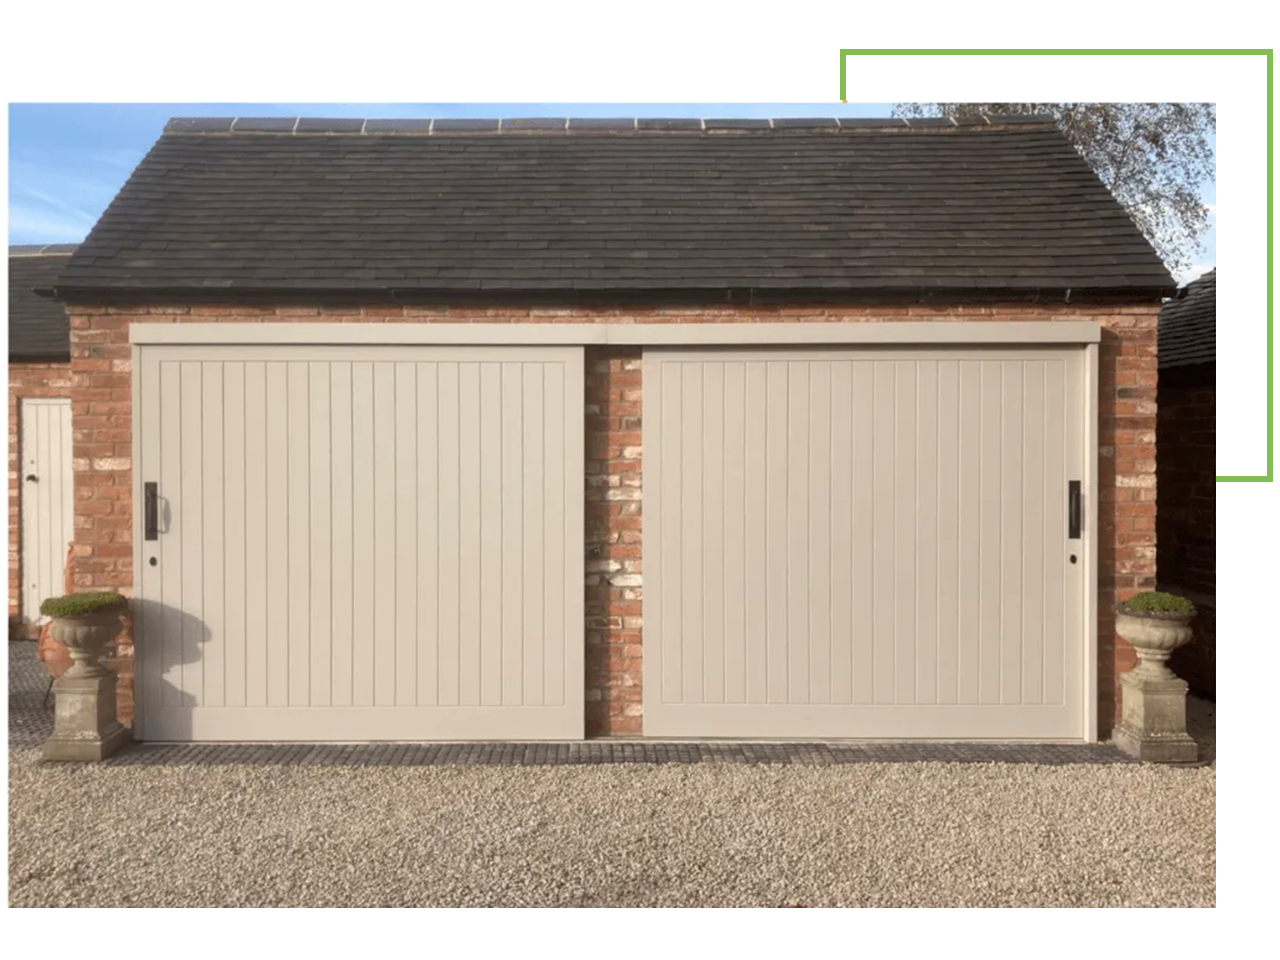 Specialist Garage Doors - Central Joinery Group